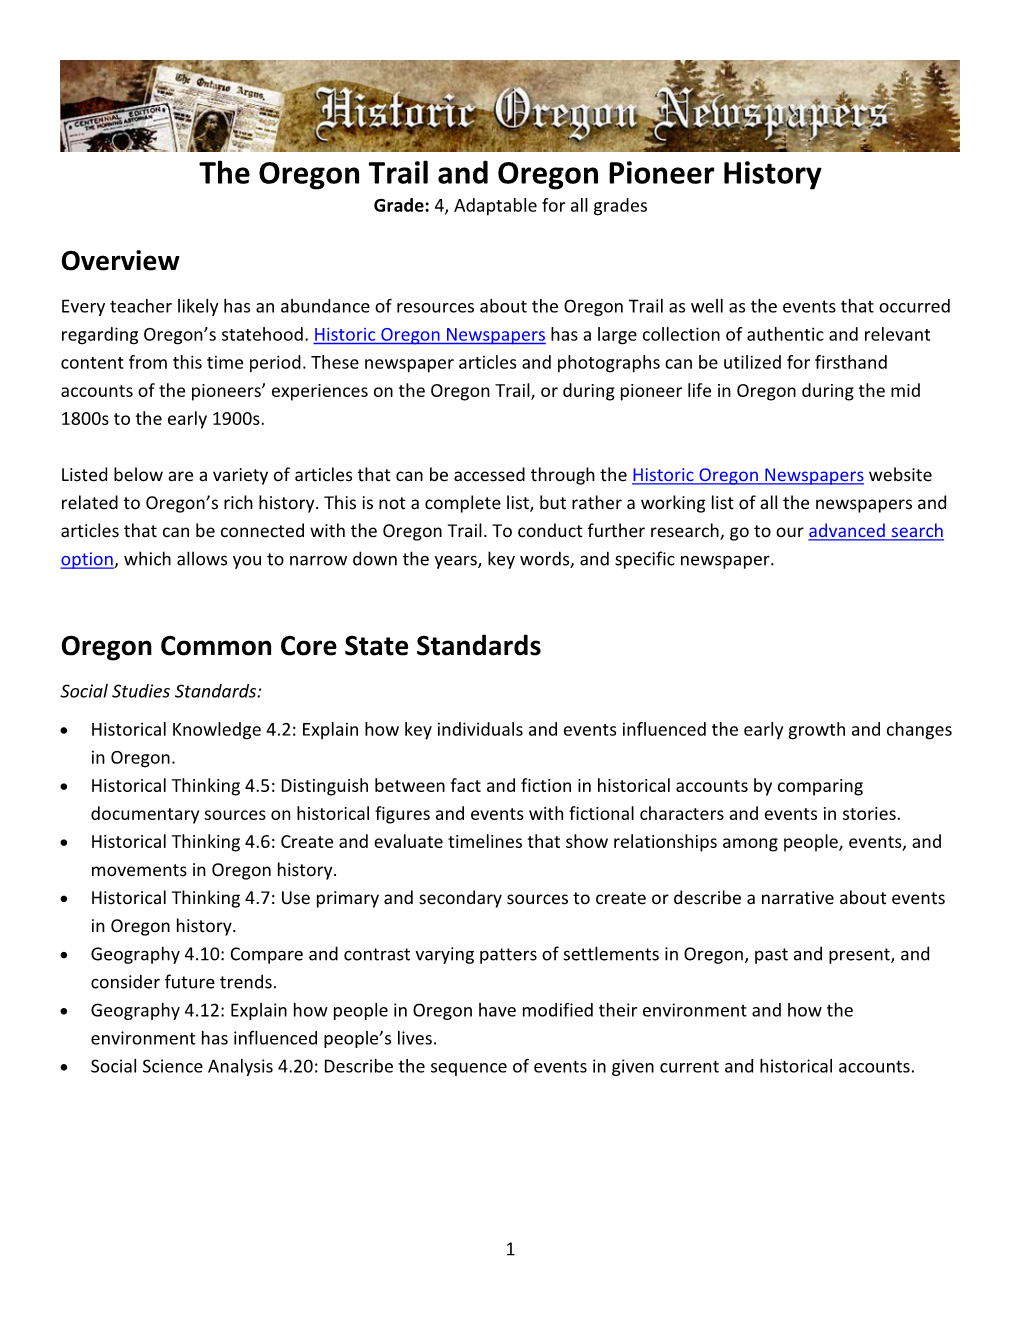 The Oregon Trail and Oregon Pioneer History Grade: 4, Adaptable for All Grades